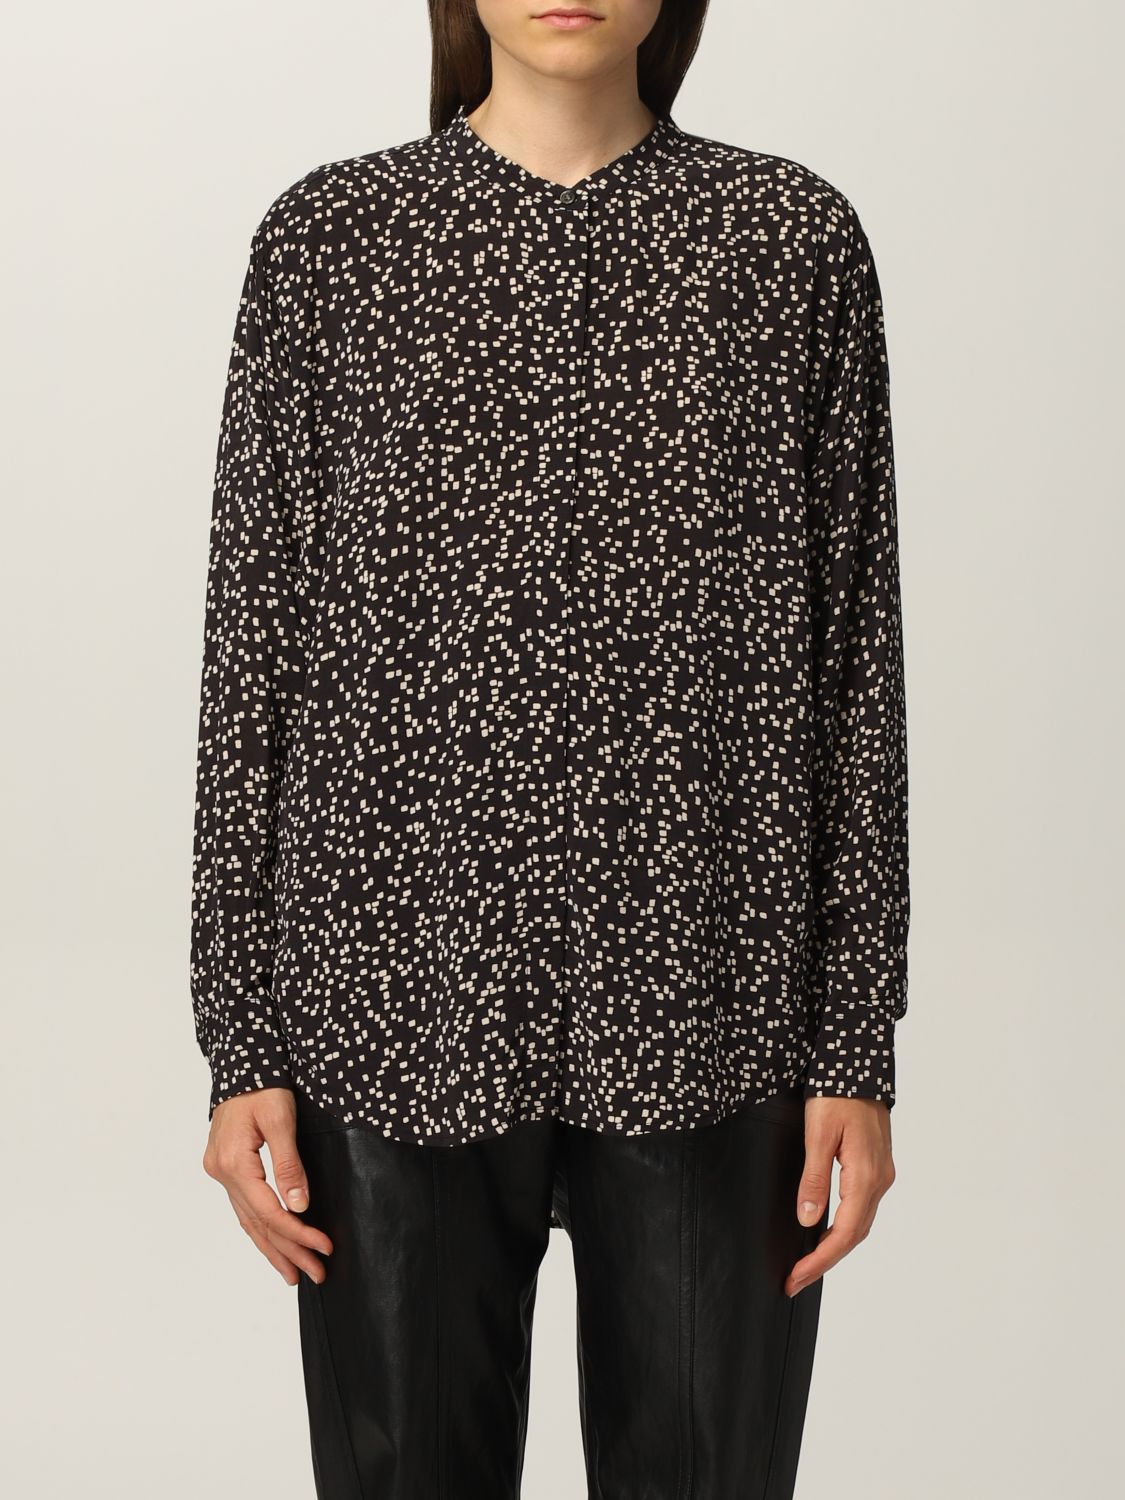 ISABEL MARANT ETOILE: cotton shirt with all over print | Shirt Isabel Marant Etoile Women Black | Isabel Marant Etoile CH062821A022E